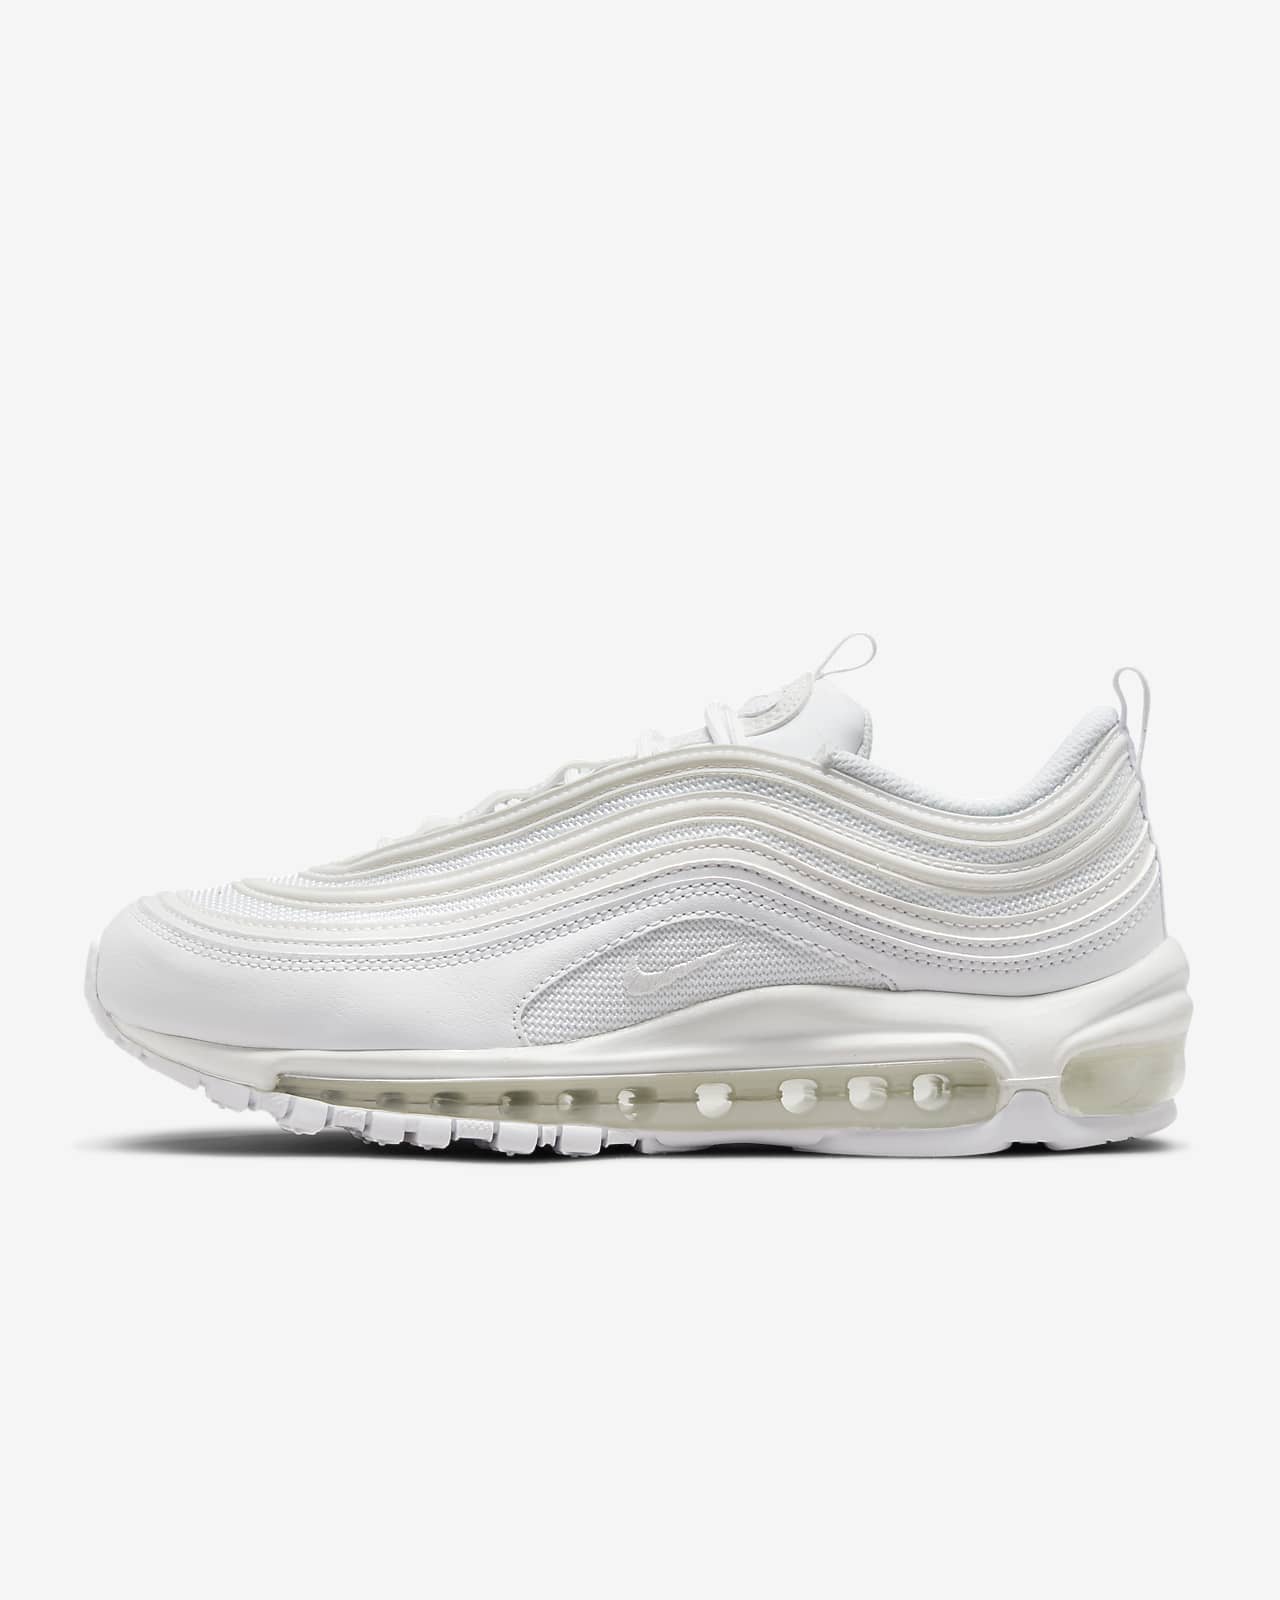 Herbs Trunk library cycle Nike Air Max 97 Women's Shoes. Nike.com